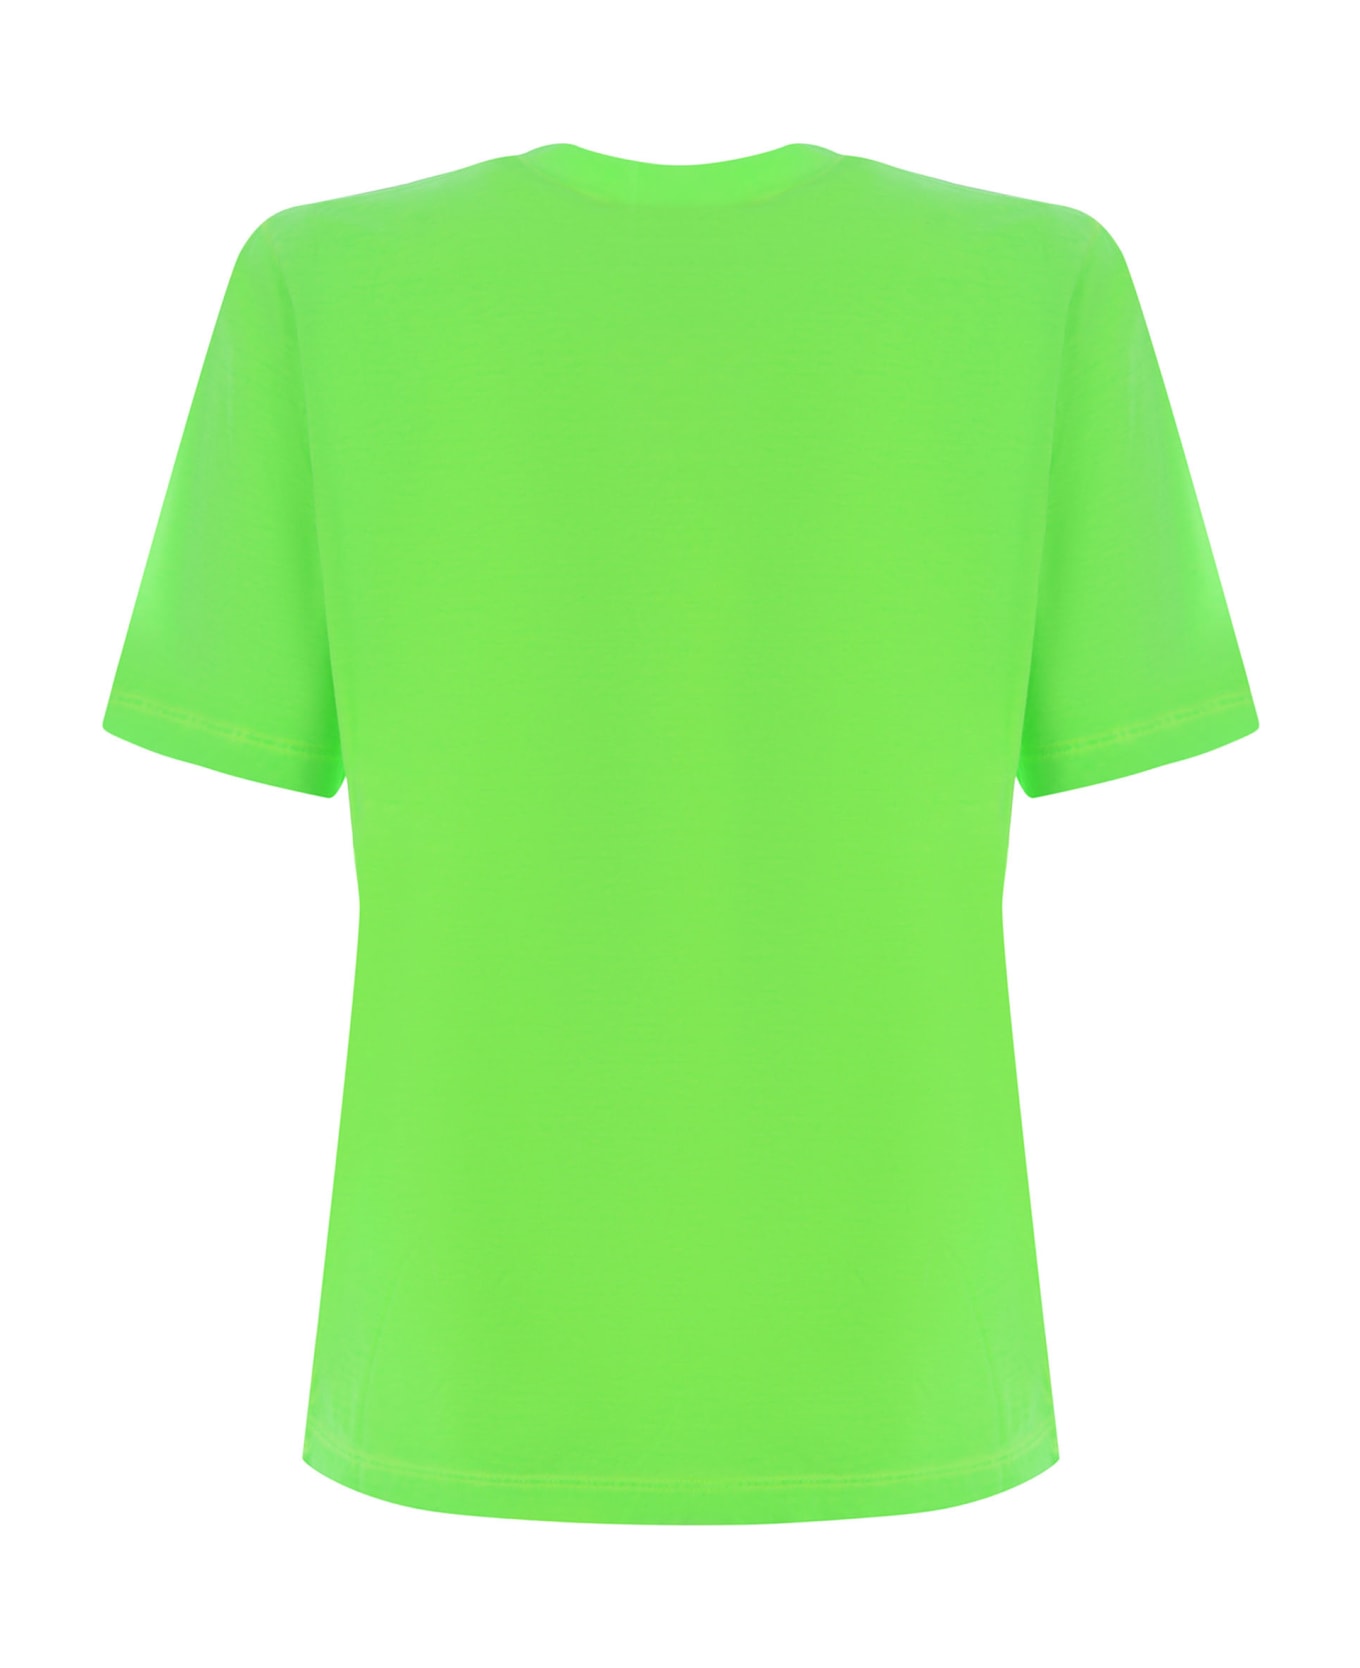 Dsquared2 T-shirt "icon" - Verde fluo Tシャツ